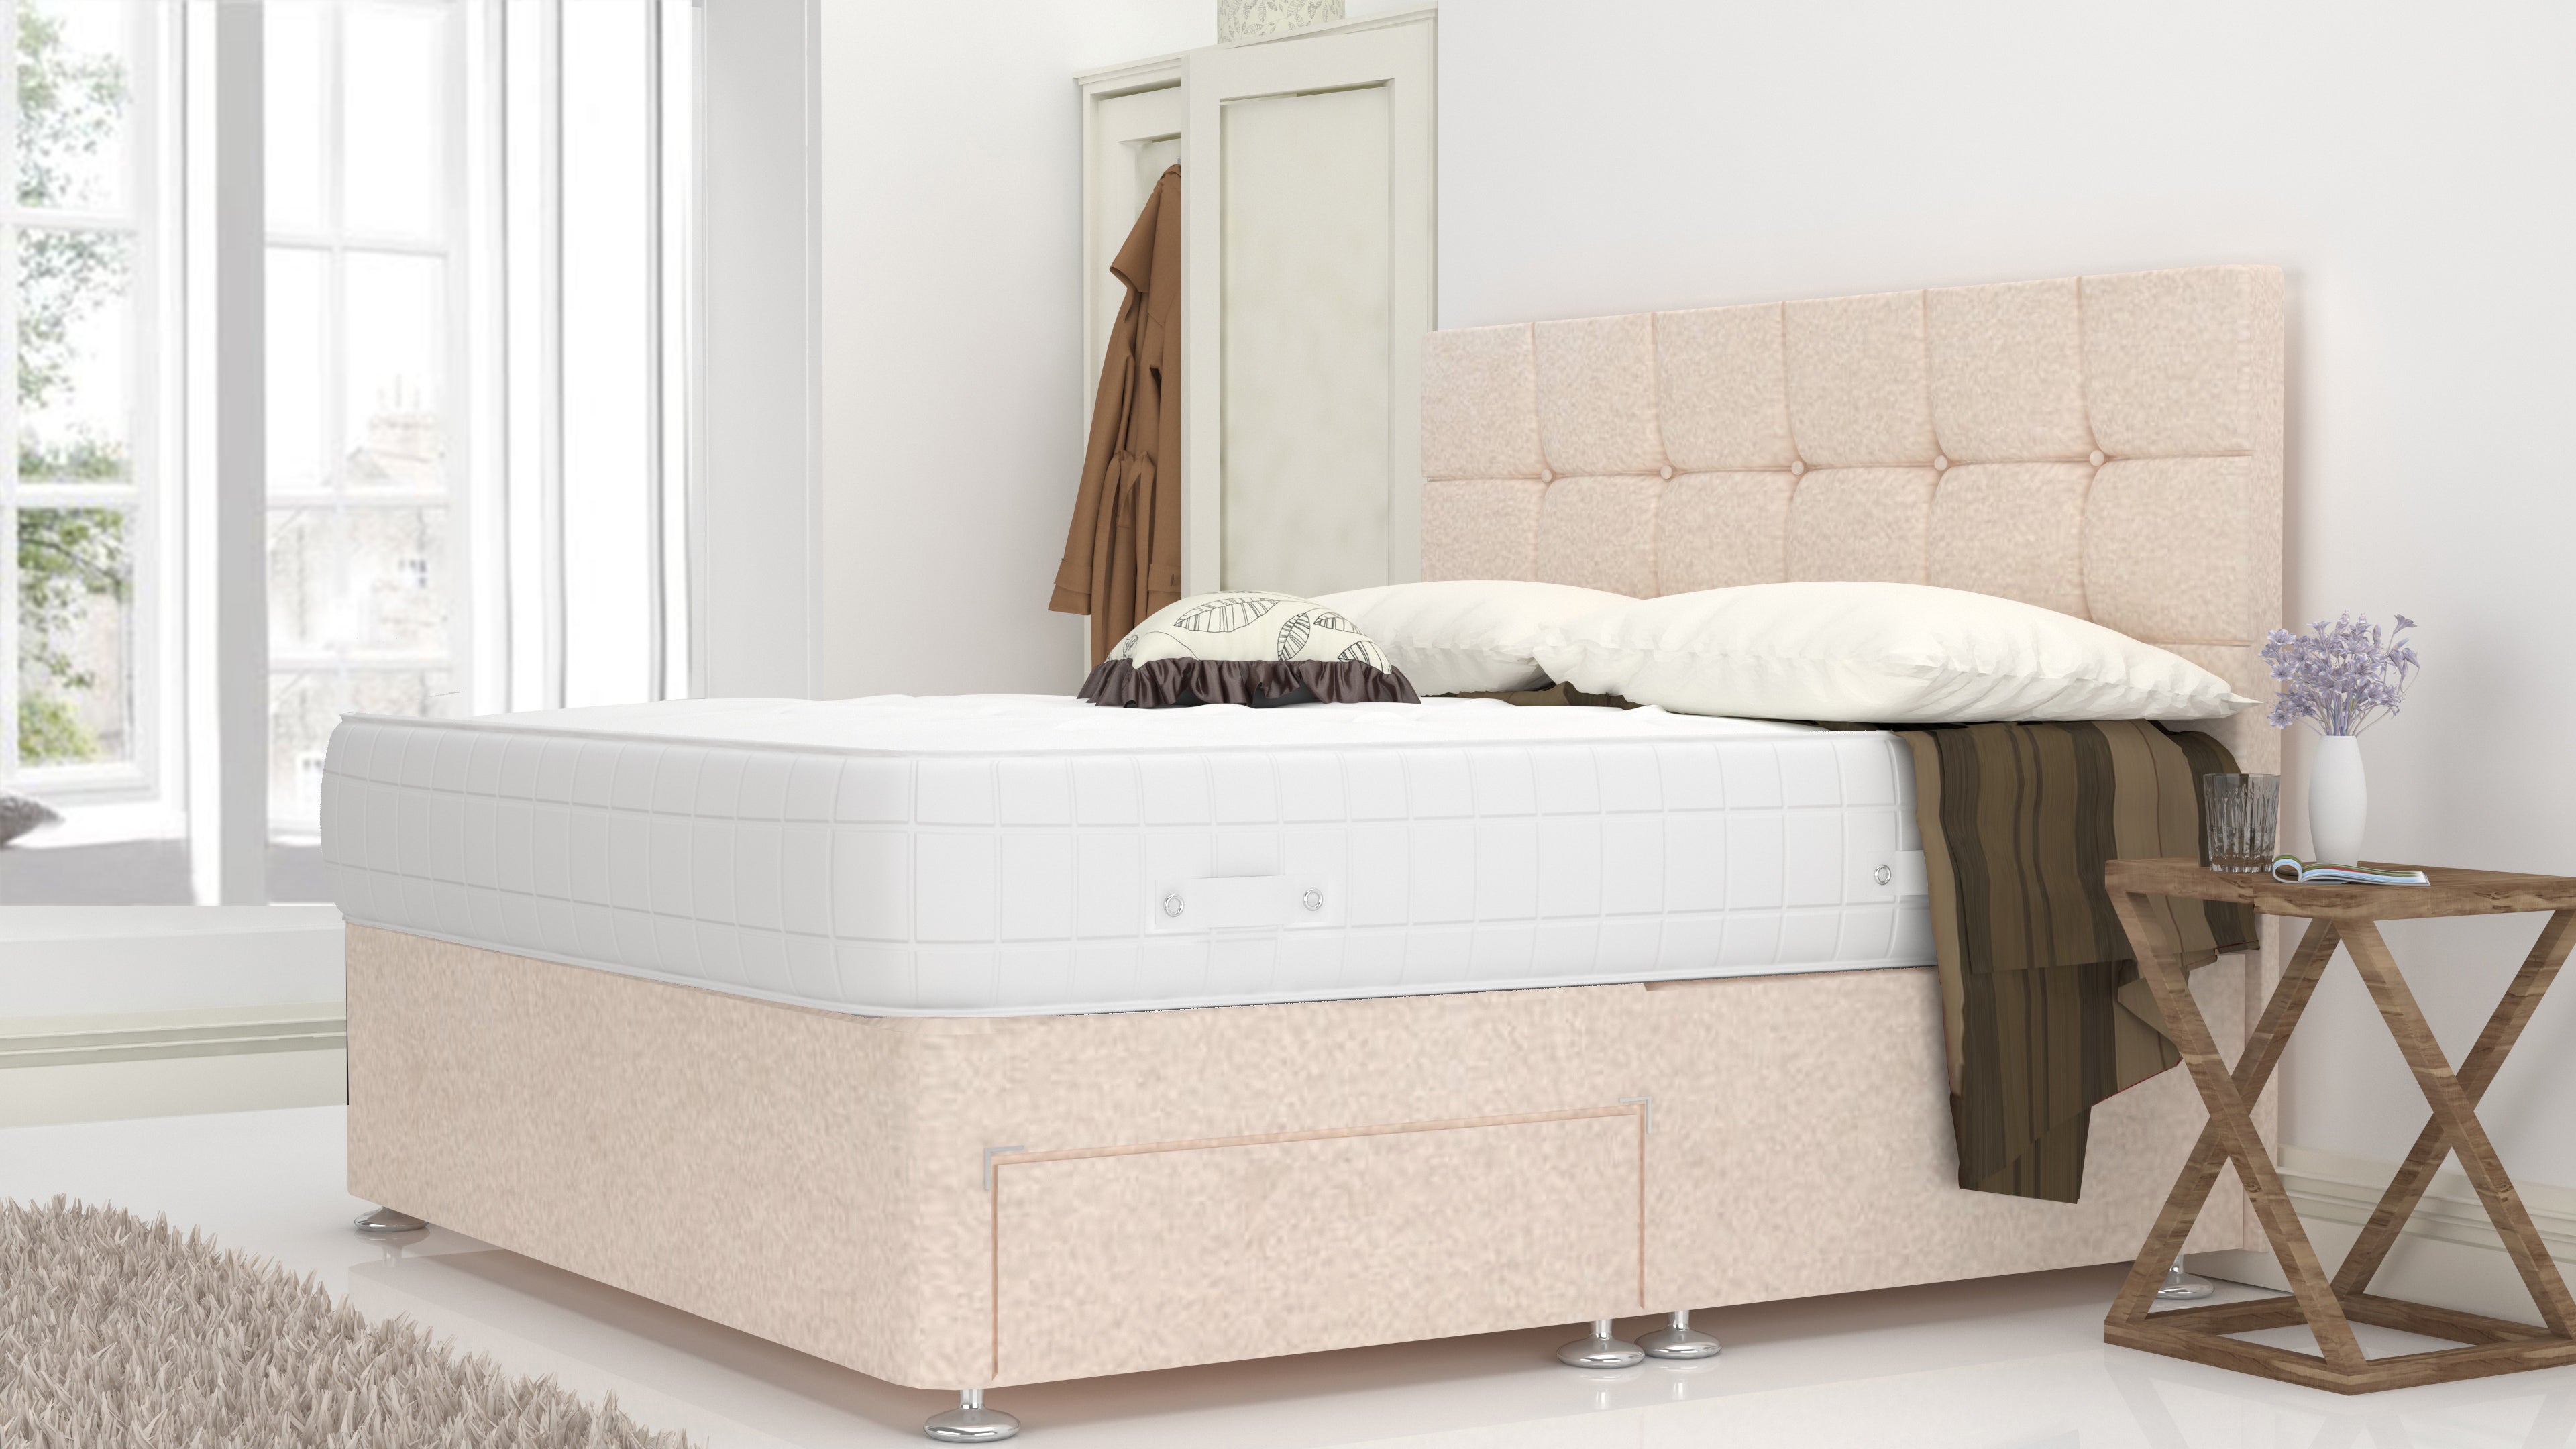 Cream Chanille 4 Feet Divan Bed Set With Cube Headboard (Included Feet) And Free Orthopedic Mattress